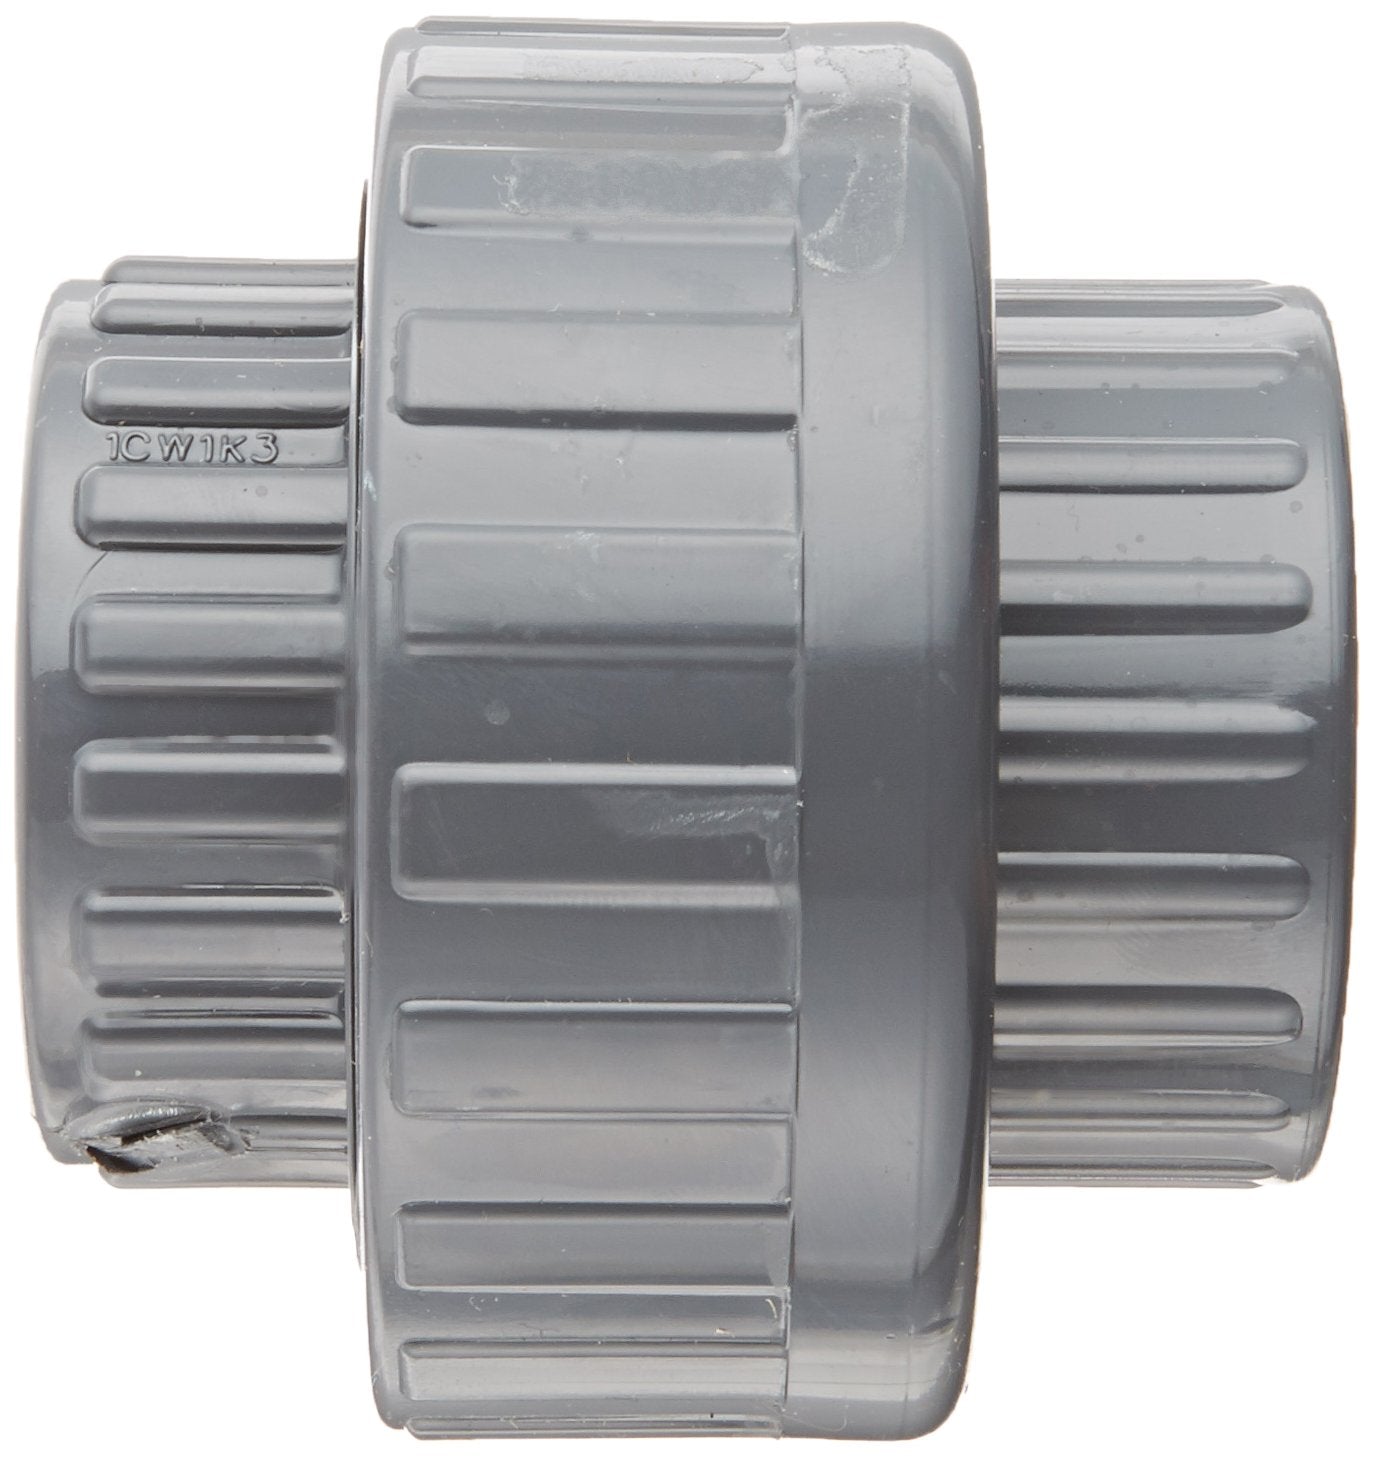 857-010 - PVC Pipe Fitting, Union with Viton O-Ring, Schedule 80, 1" Socket